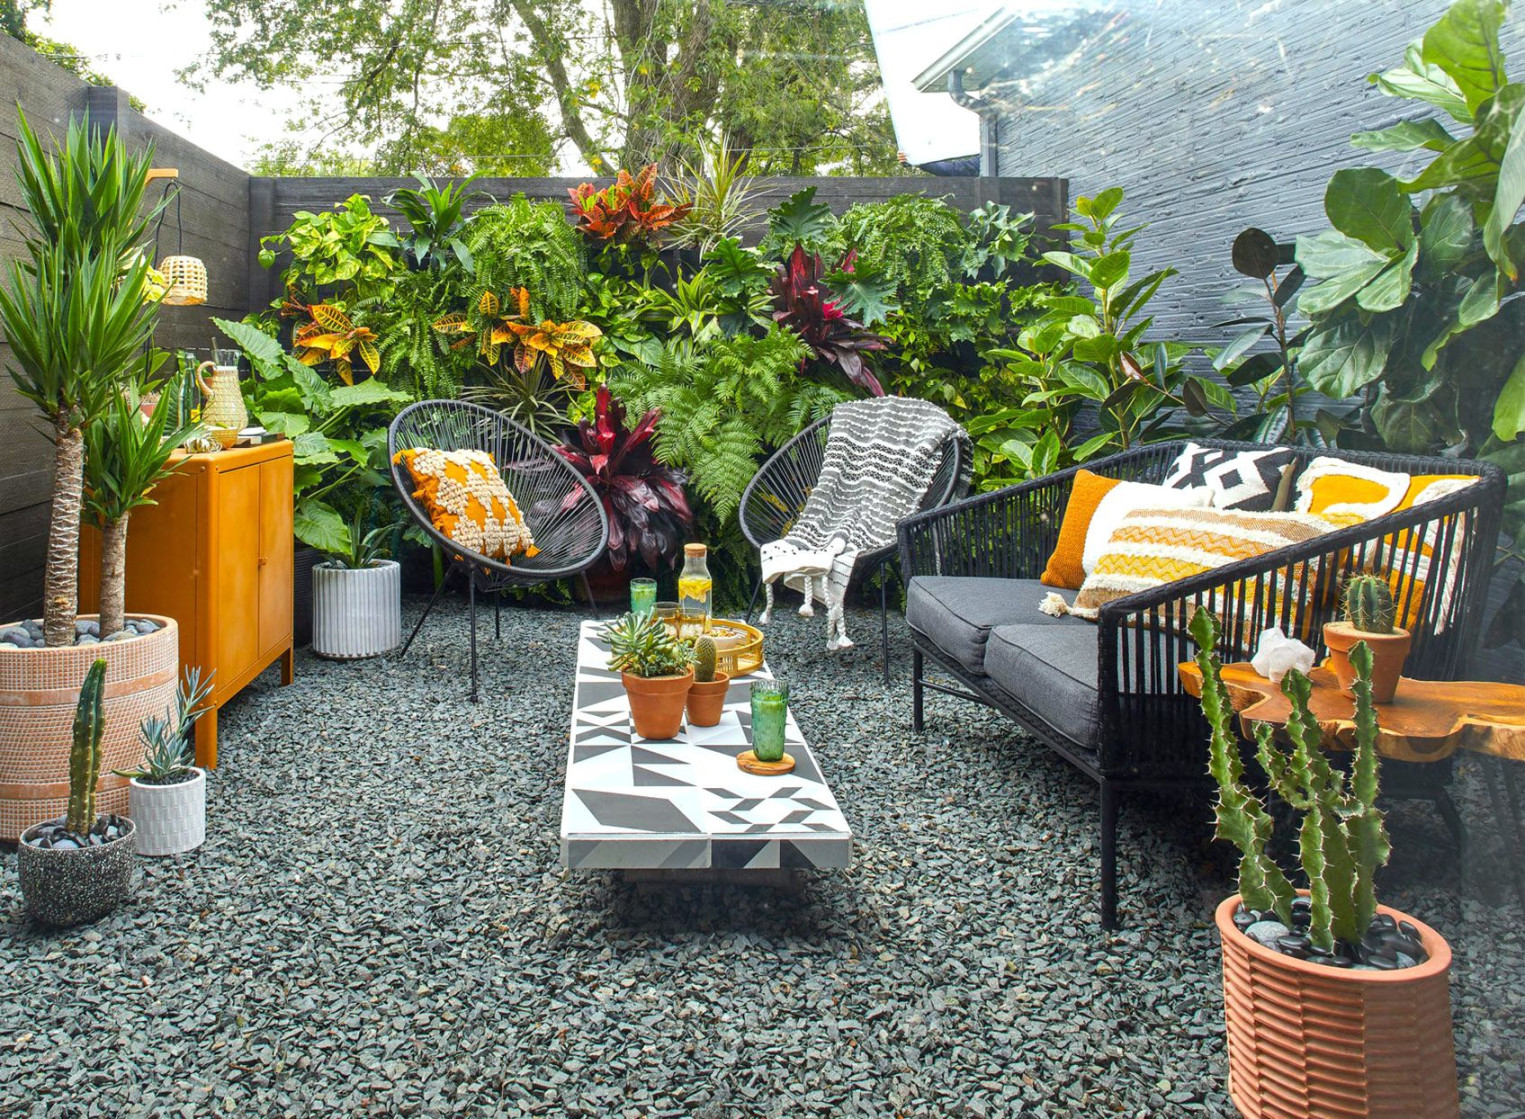 Big Ideas to Make Your Small Backyard Better